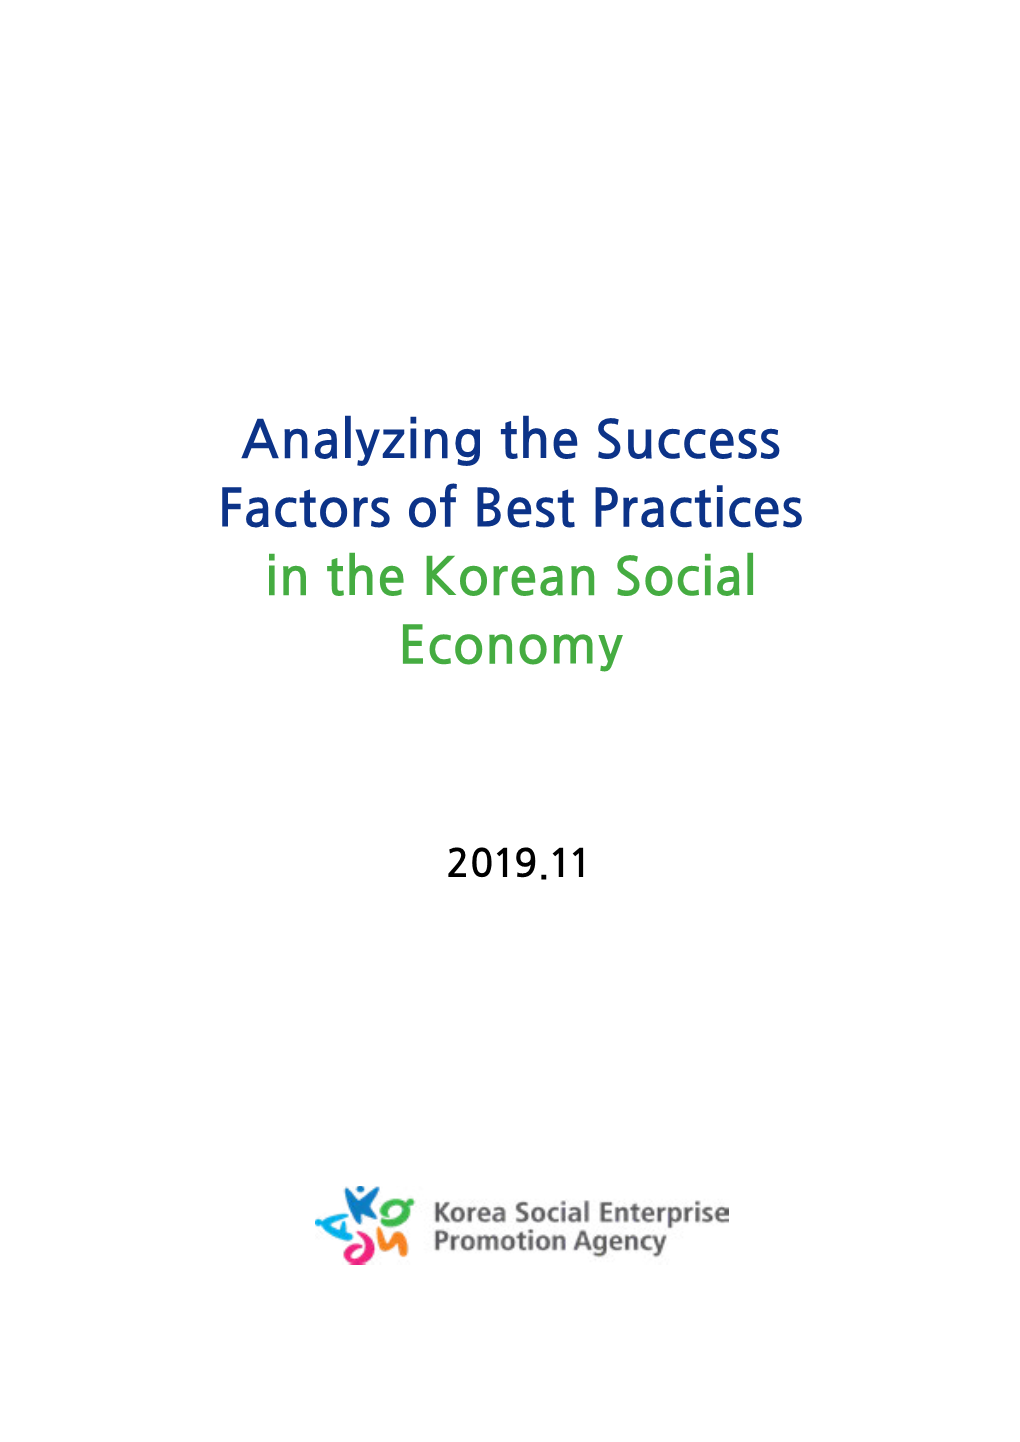 Analyzing the Success Factors of Best Practices in the Korean Social Economy